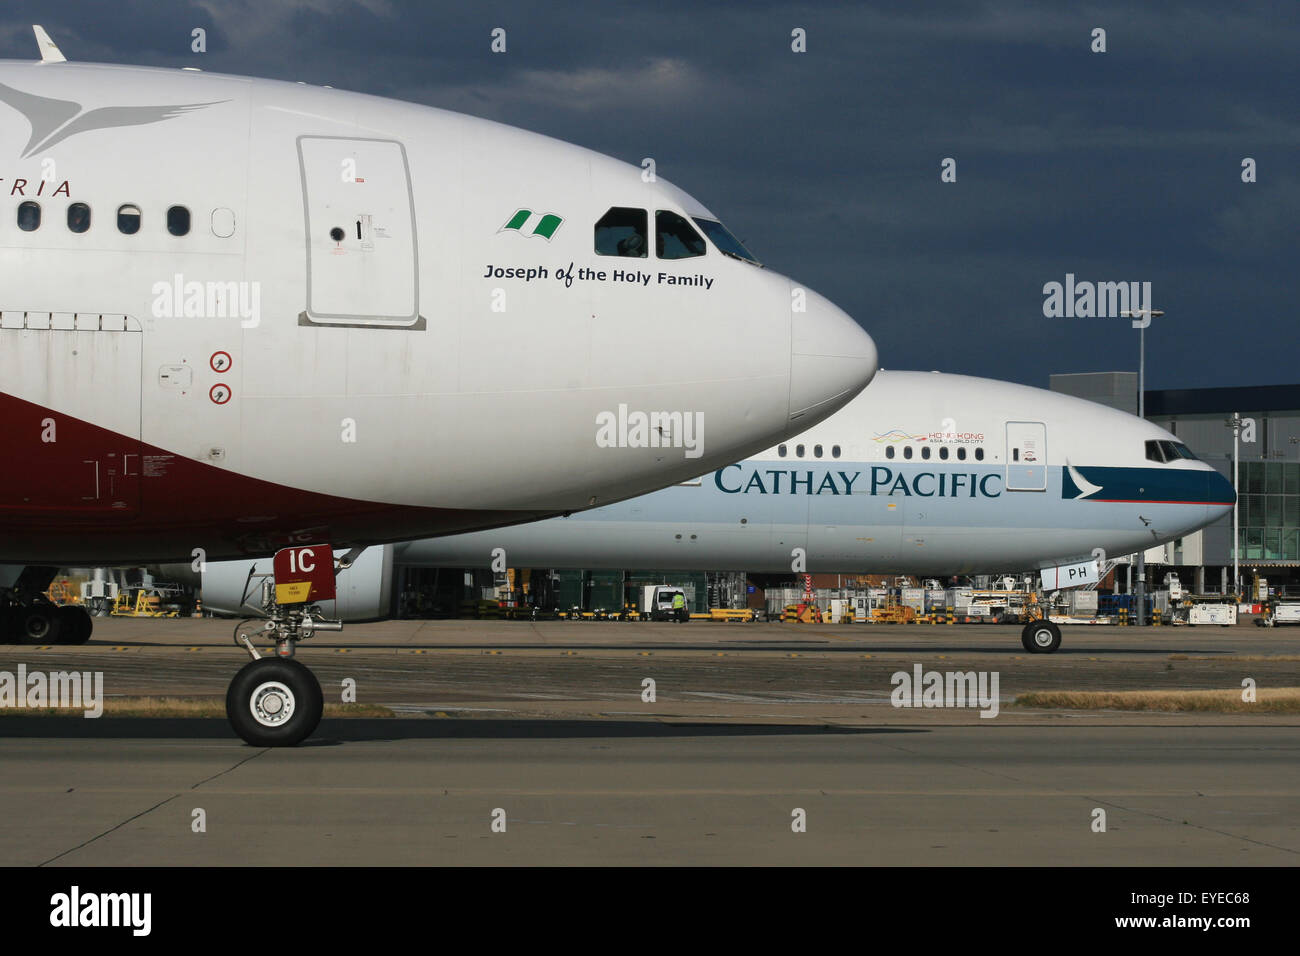 AIRCRAFT PLANES AIRBUS AND BOEING Stock Photo